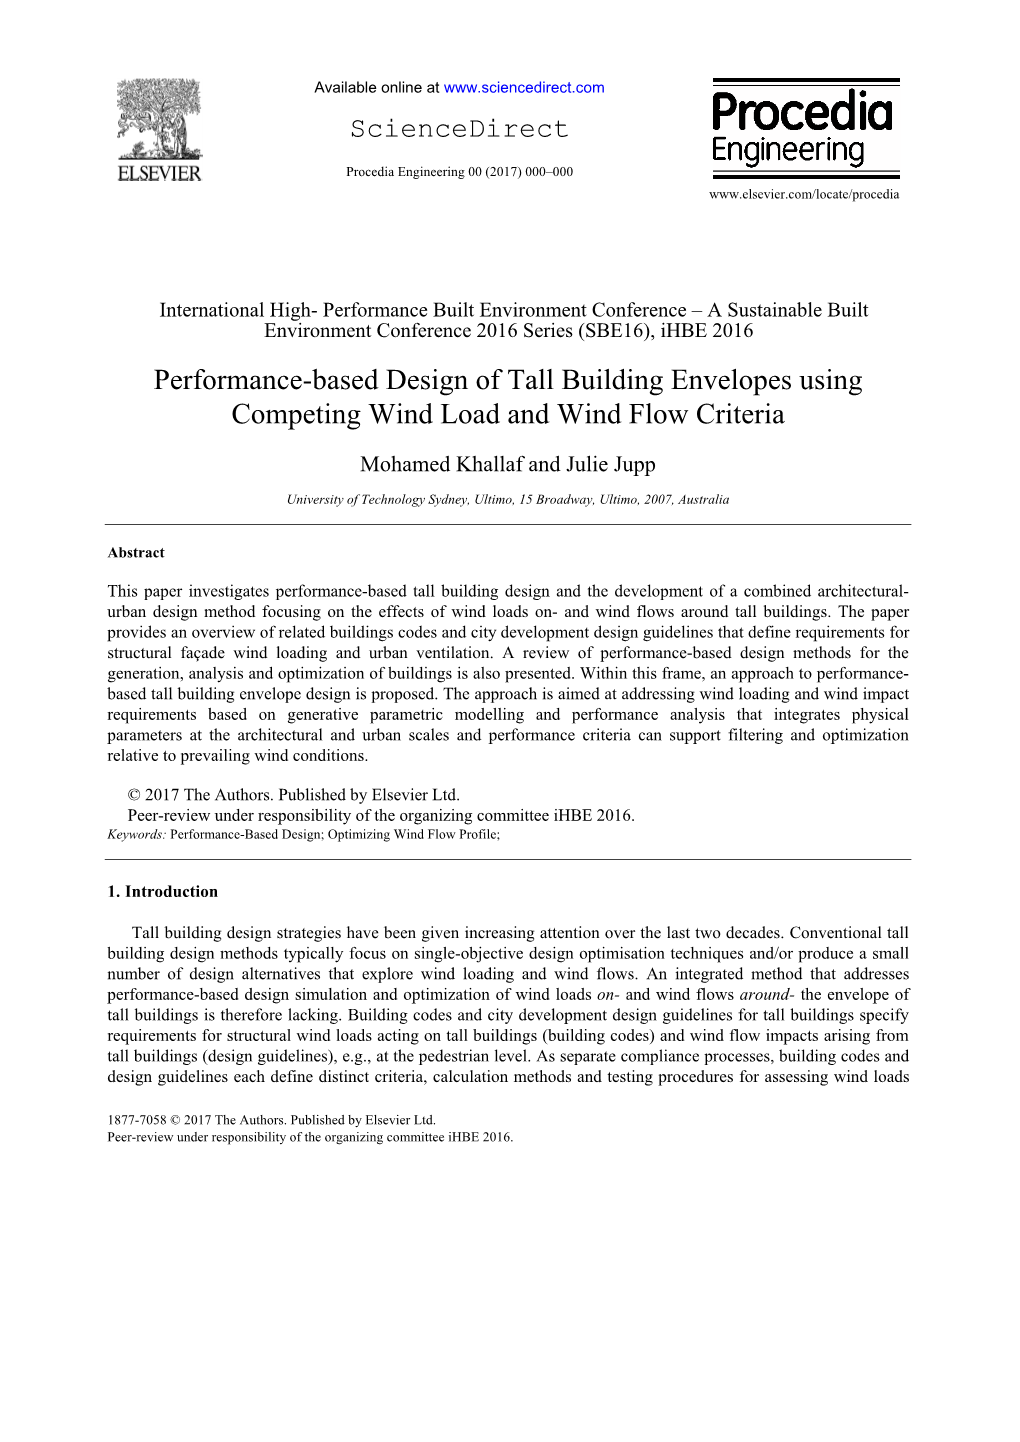 Performance-Based Design of Tall Building Envelopes Using Competing Wind Load and Wind Flow Criteria